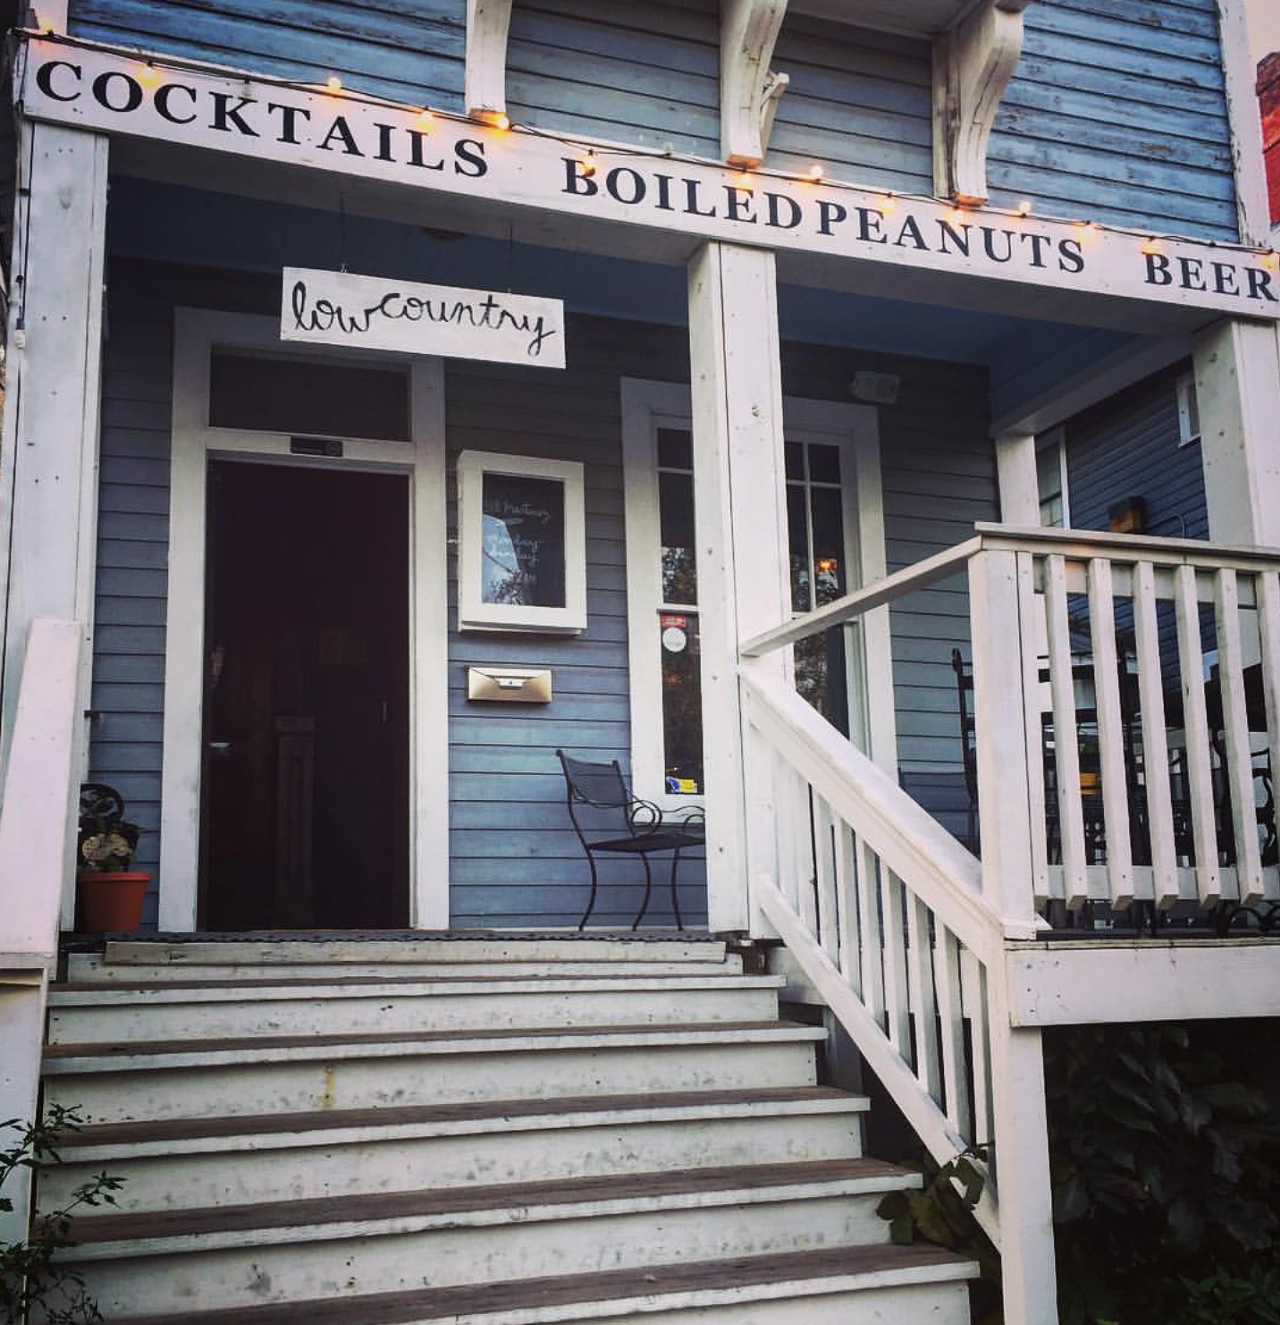 Lowcountry
318 Martinez St., (210) 560-2224, lowcountrysa.com
Patio pounders don’t come any better than at Lowcountry, a porch oasis for the downtown set that has a killer happy hour and occasional pop-ups by Swine House.
Photo via Instagram / do210